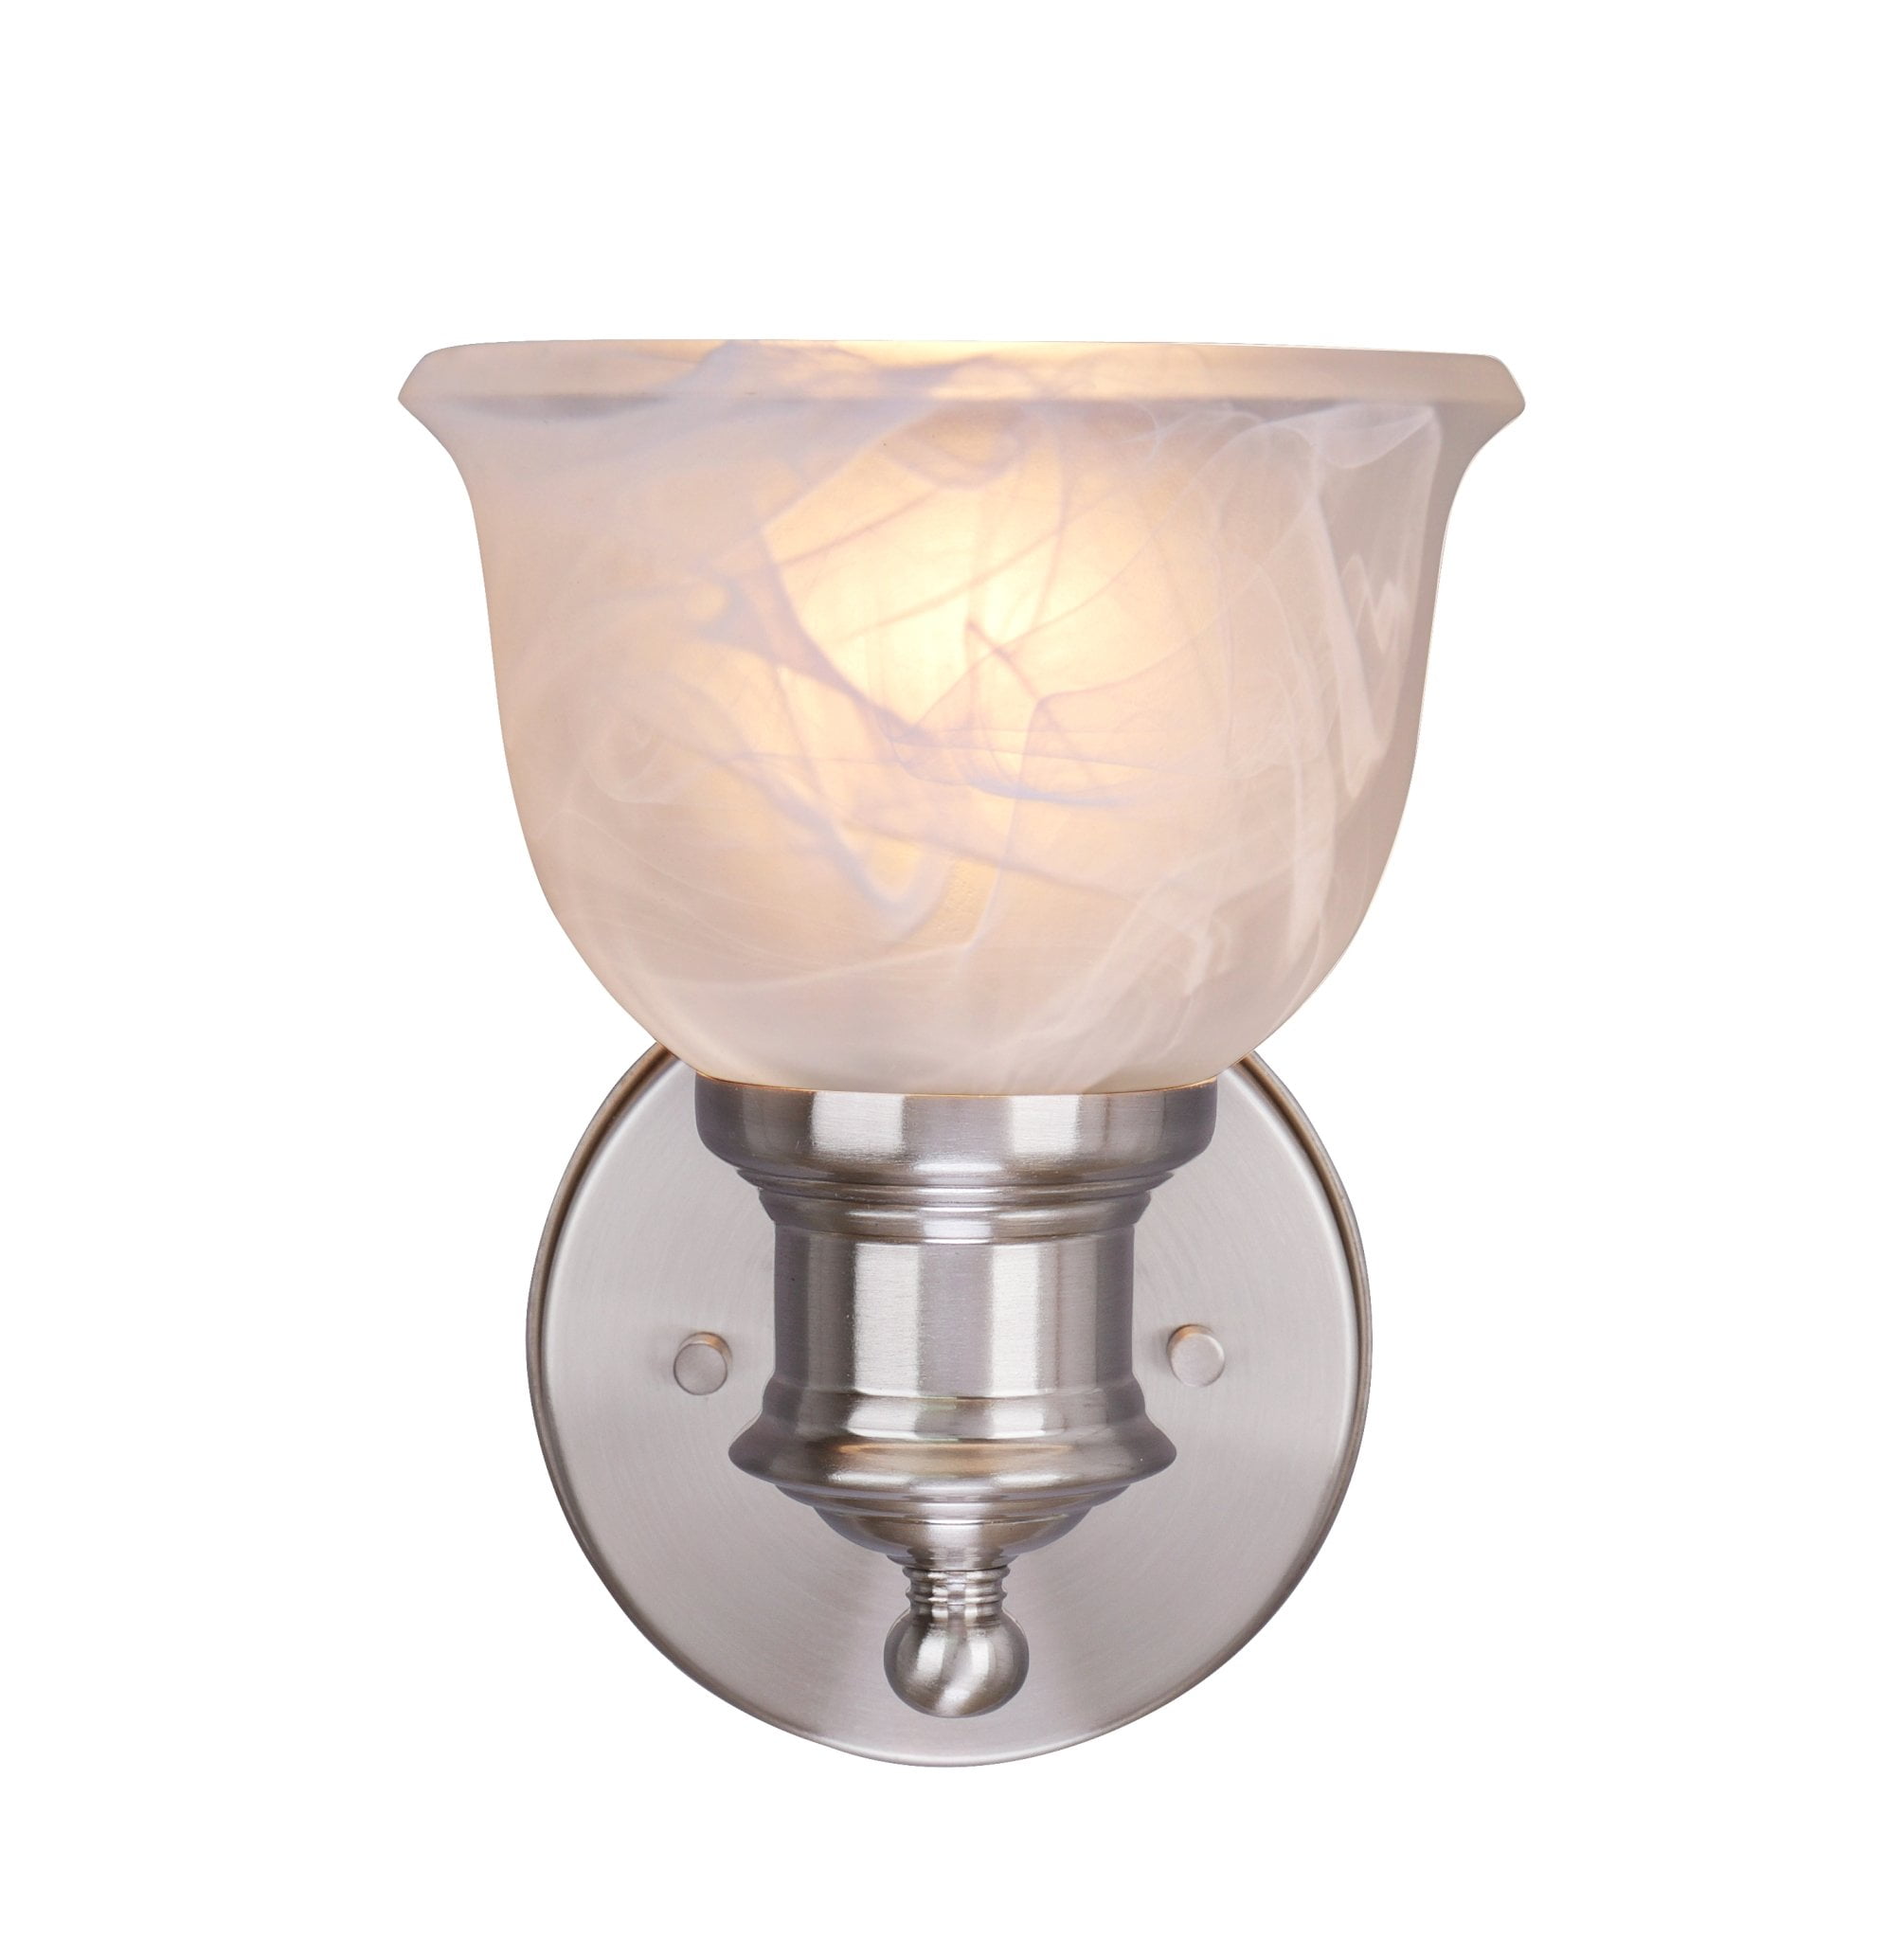 Aspen Creative 62133 Transitional Design in Brushed Nickel with Faux Alabaster Glass Shade 5 1/2 Wide 5 1/2 Wide One-Light Metal Bathroom Vanity Wall Light Fixture